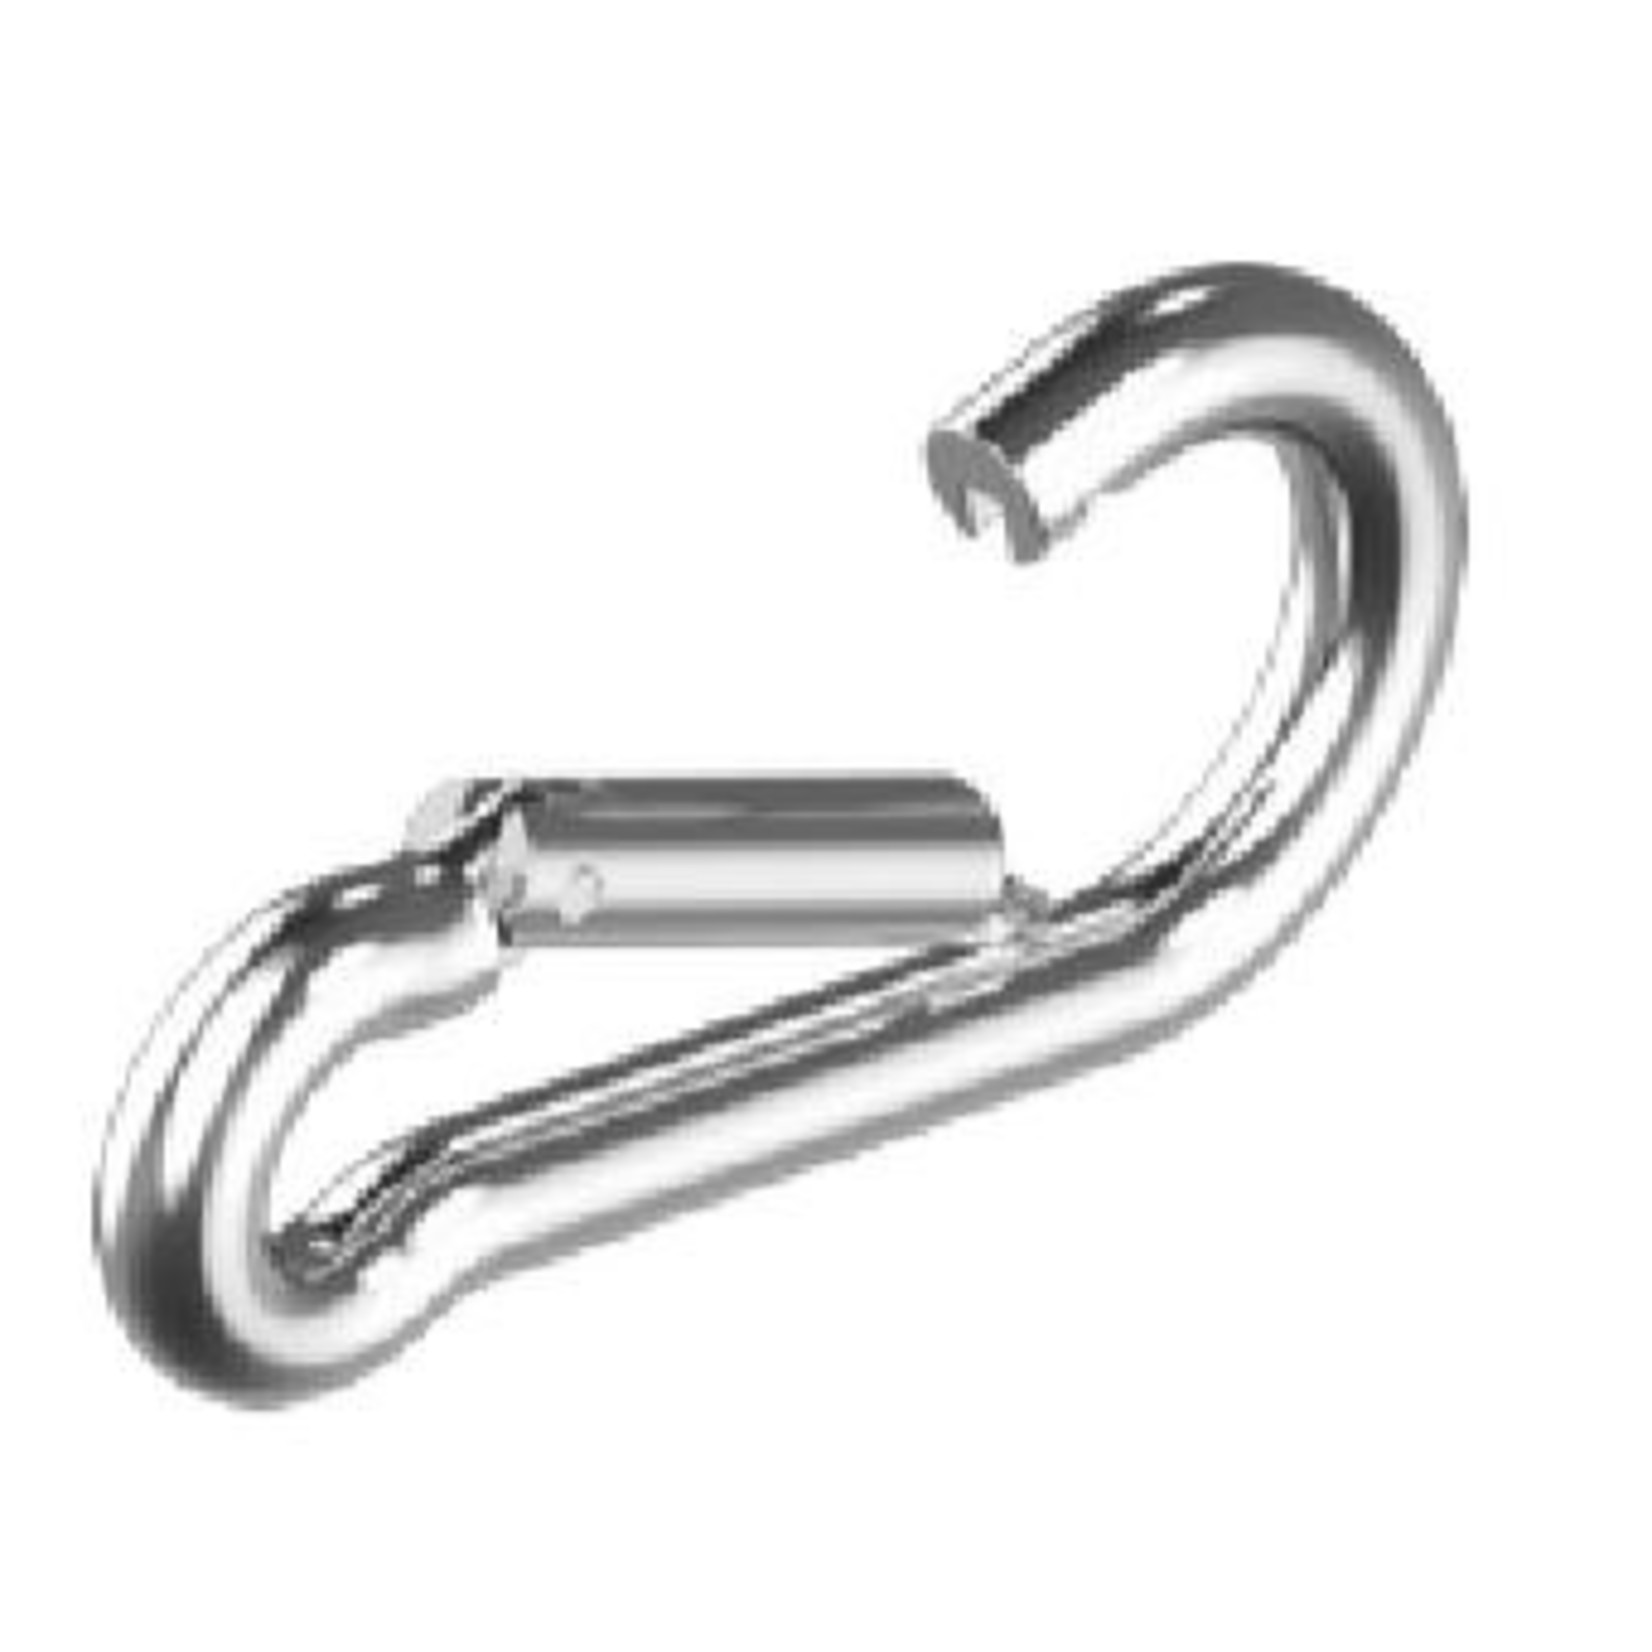 Snap hook stainless 8x80mm 10 pcs